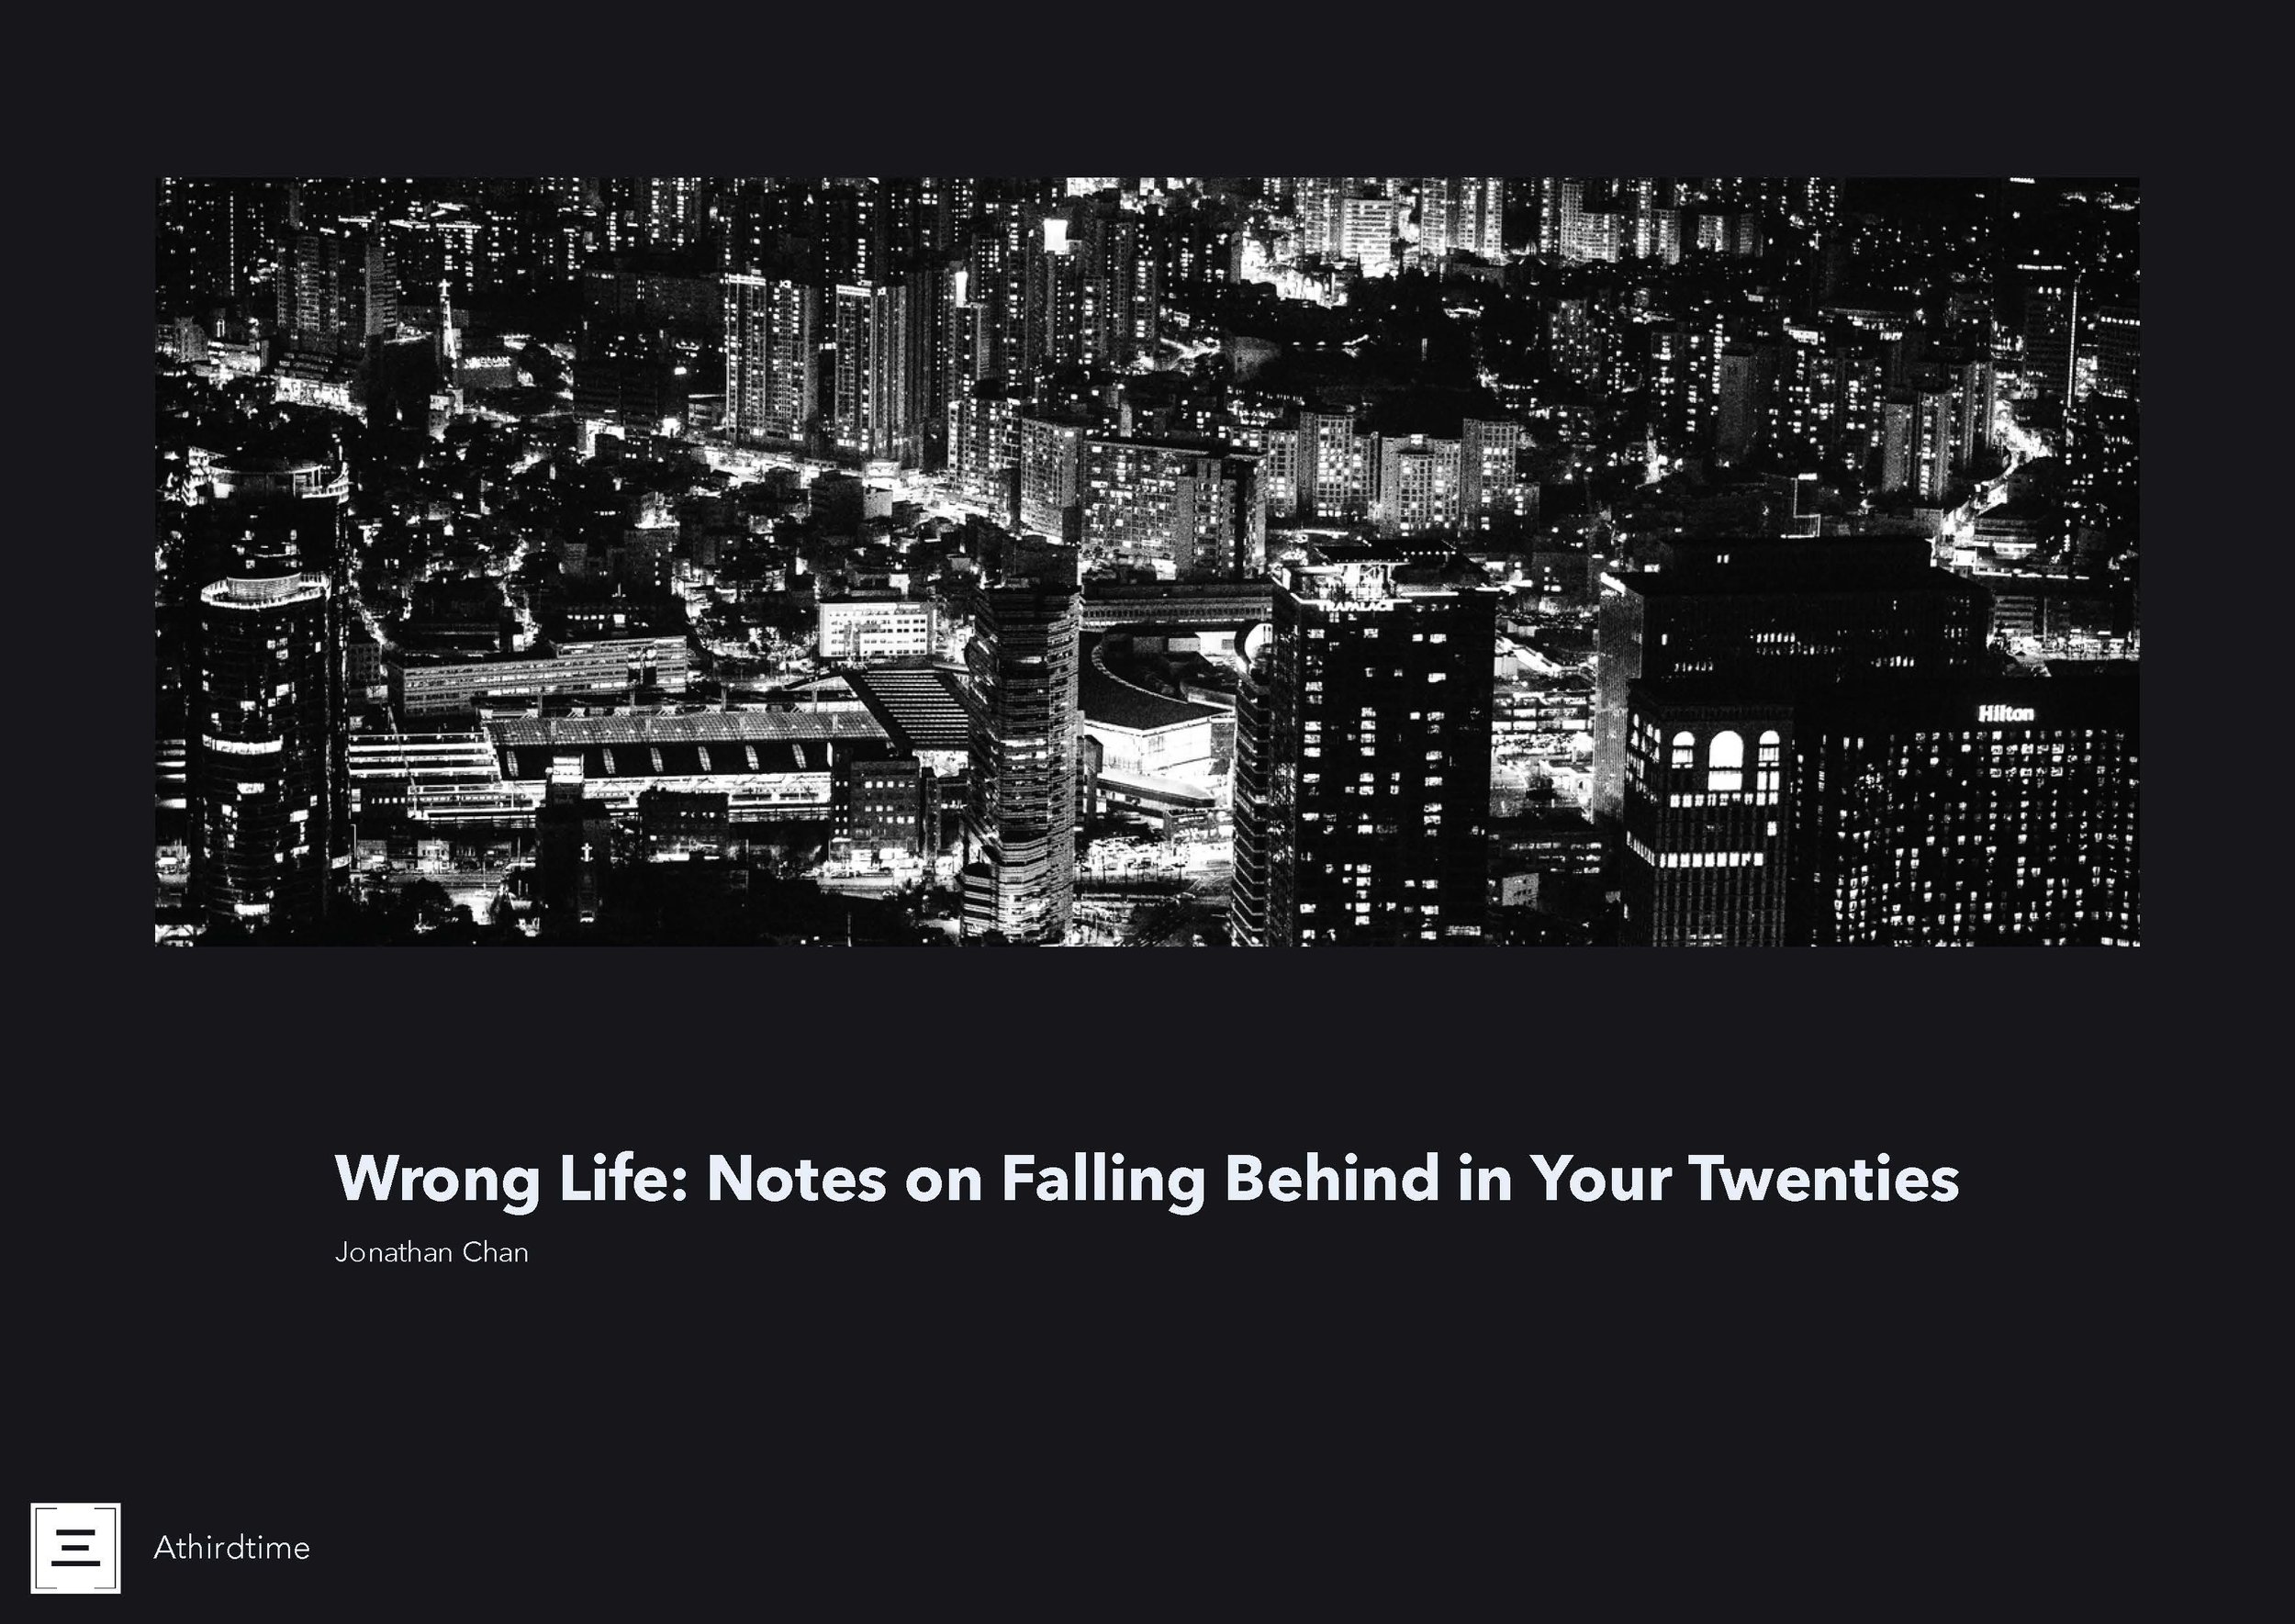 Wrong Life_ Notes on Falling Behind in Your Twenties (FINAL VERSION)_Page_001.jpg